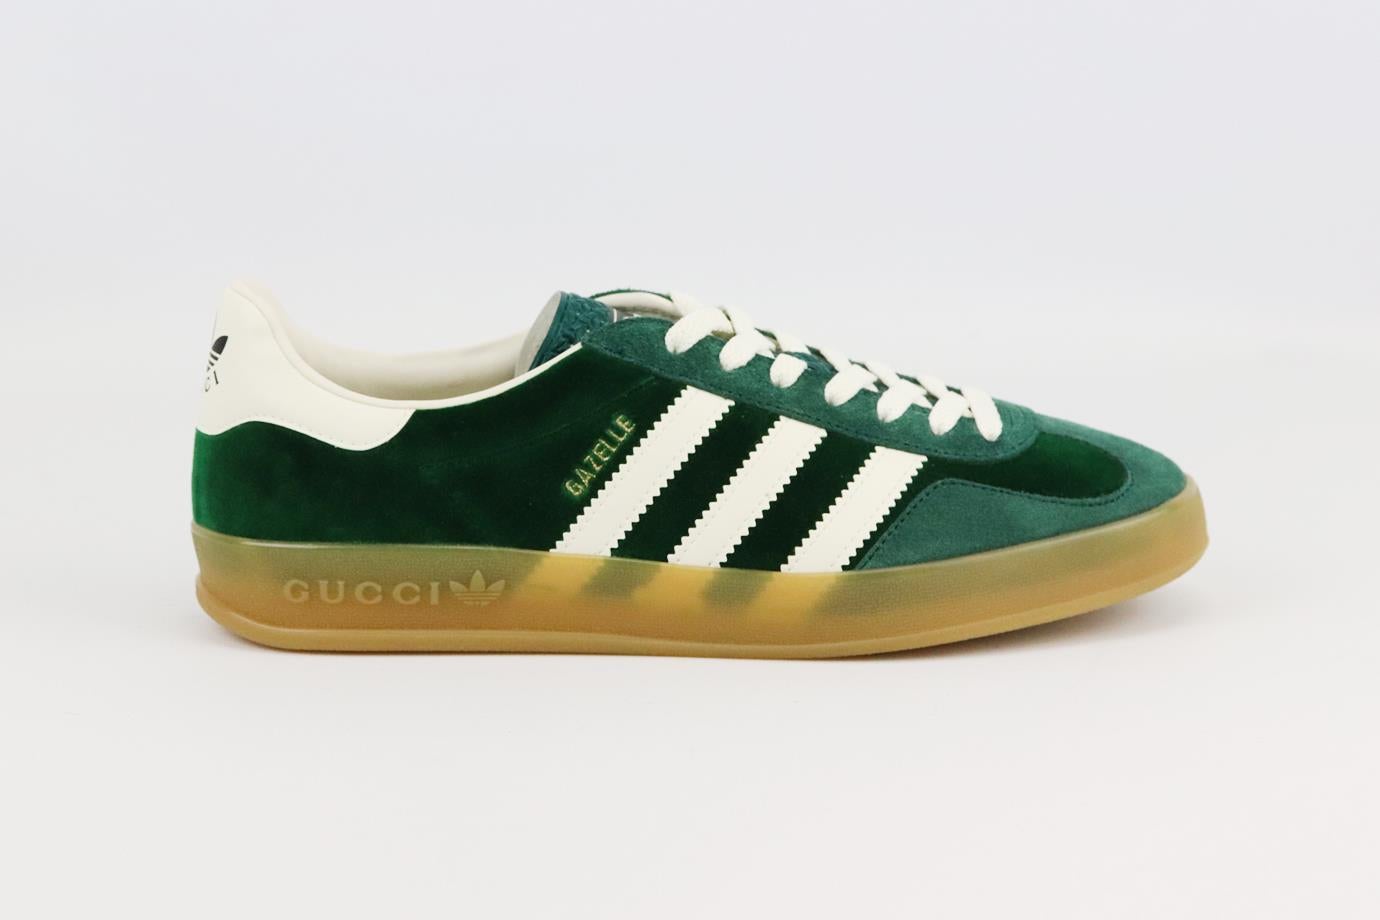 Gucci + Adidas Gazelle velvet and suede sneakers. Green and white. Lace up fastening at front. Comes with dustbag. Size: EU 40 (UK 7, US 10). Insole: 10.5 in. Heel: 1 in
